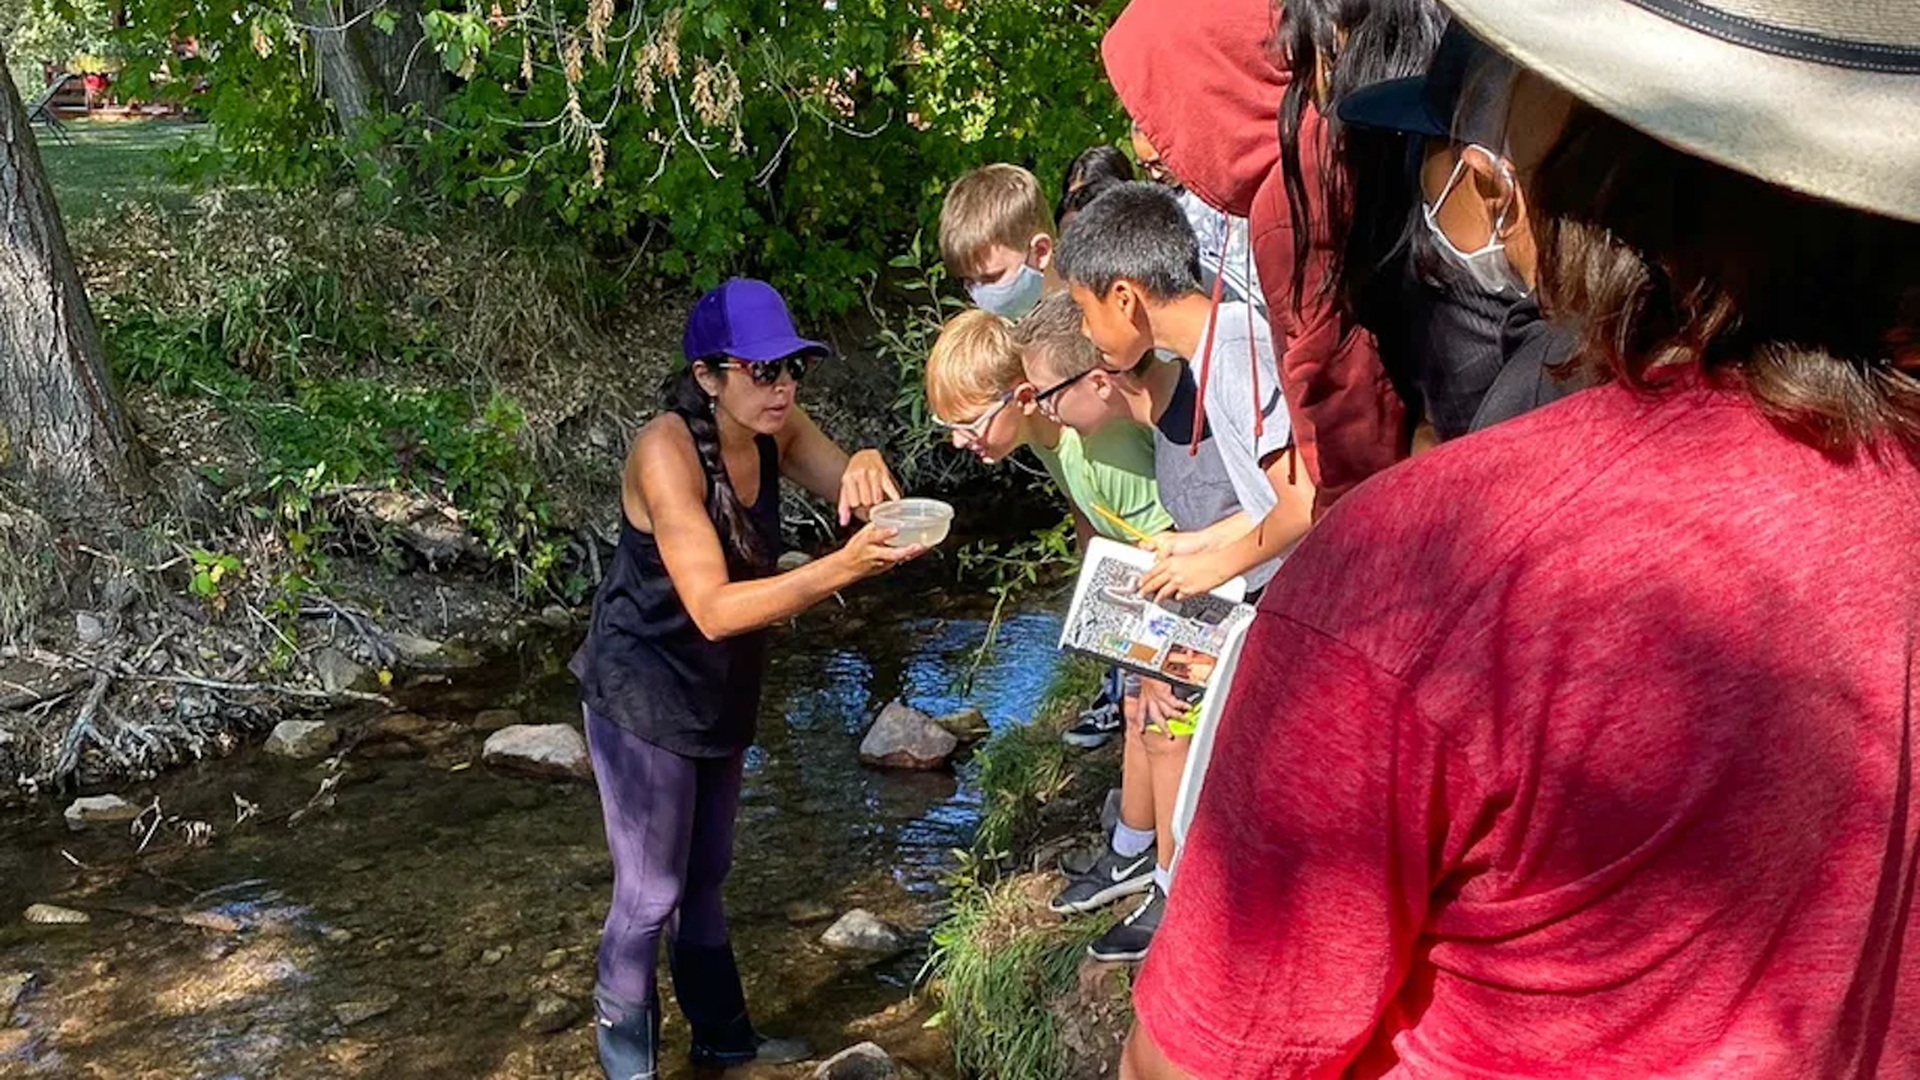 Autumn Rivera during a field trip with her students from Glenwood Springs Middle School. Photo courtesy of Autumn Rivera